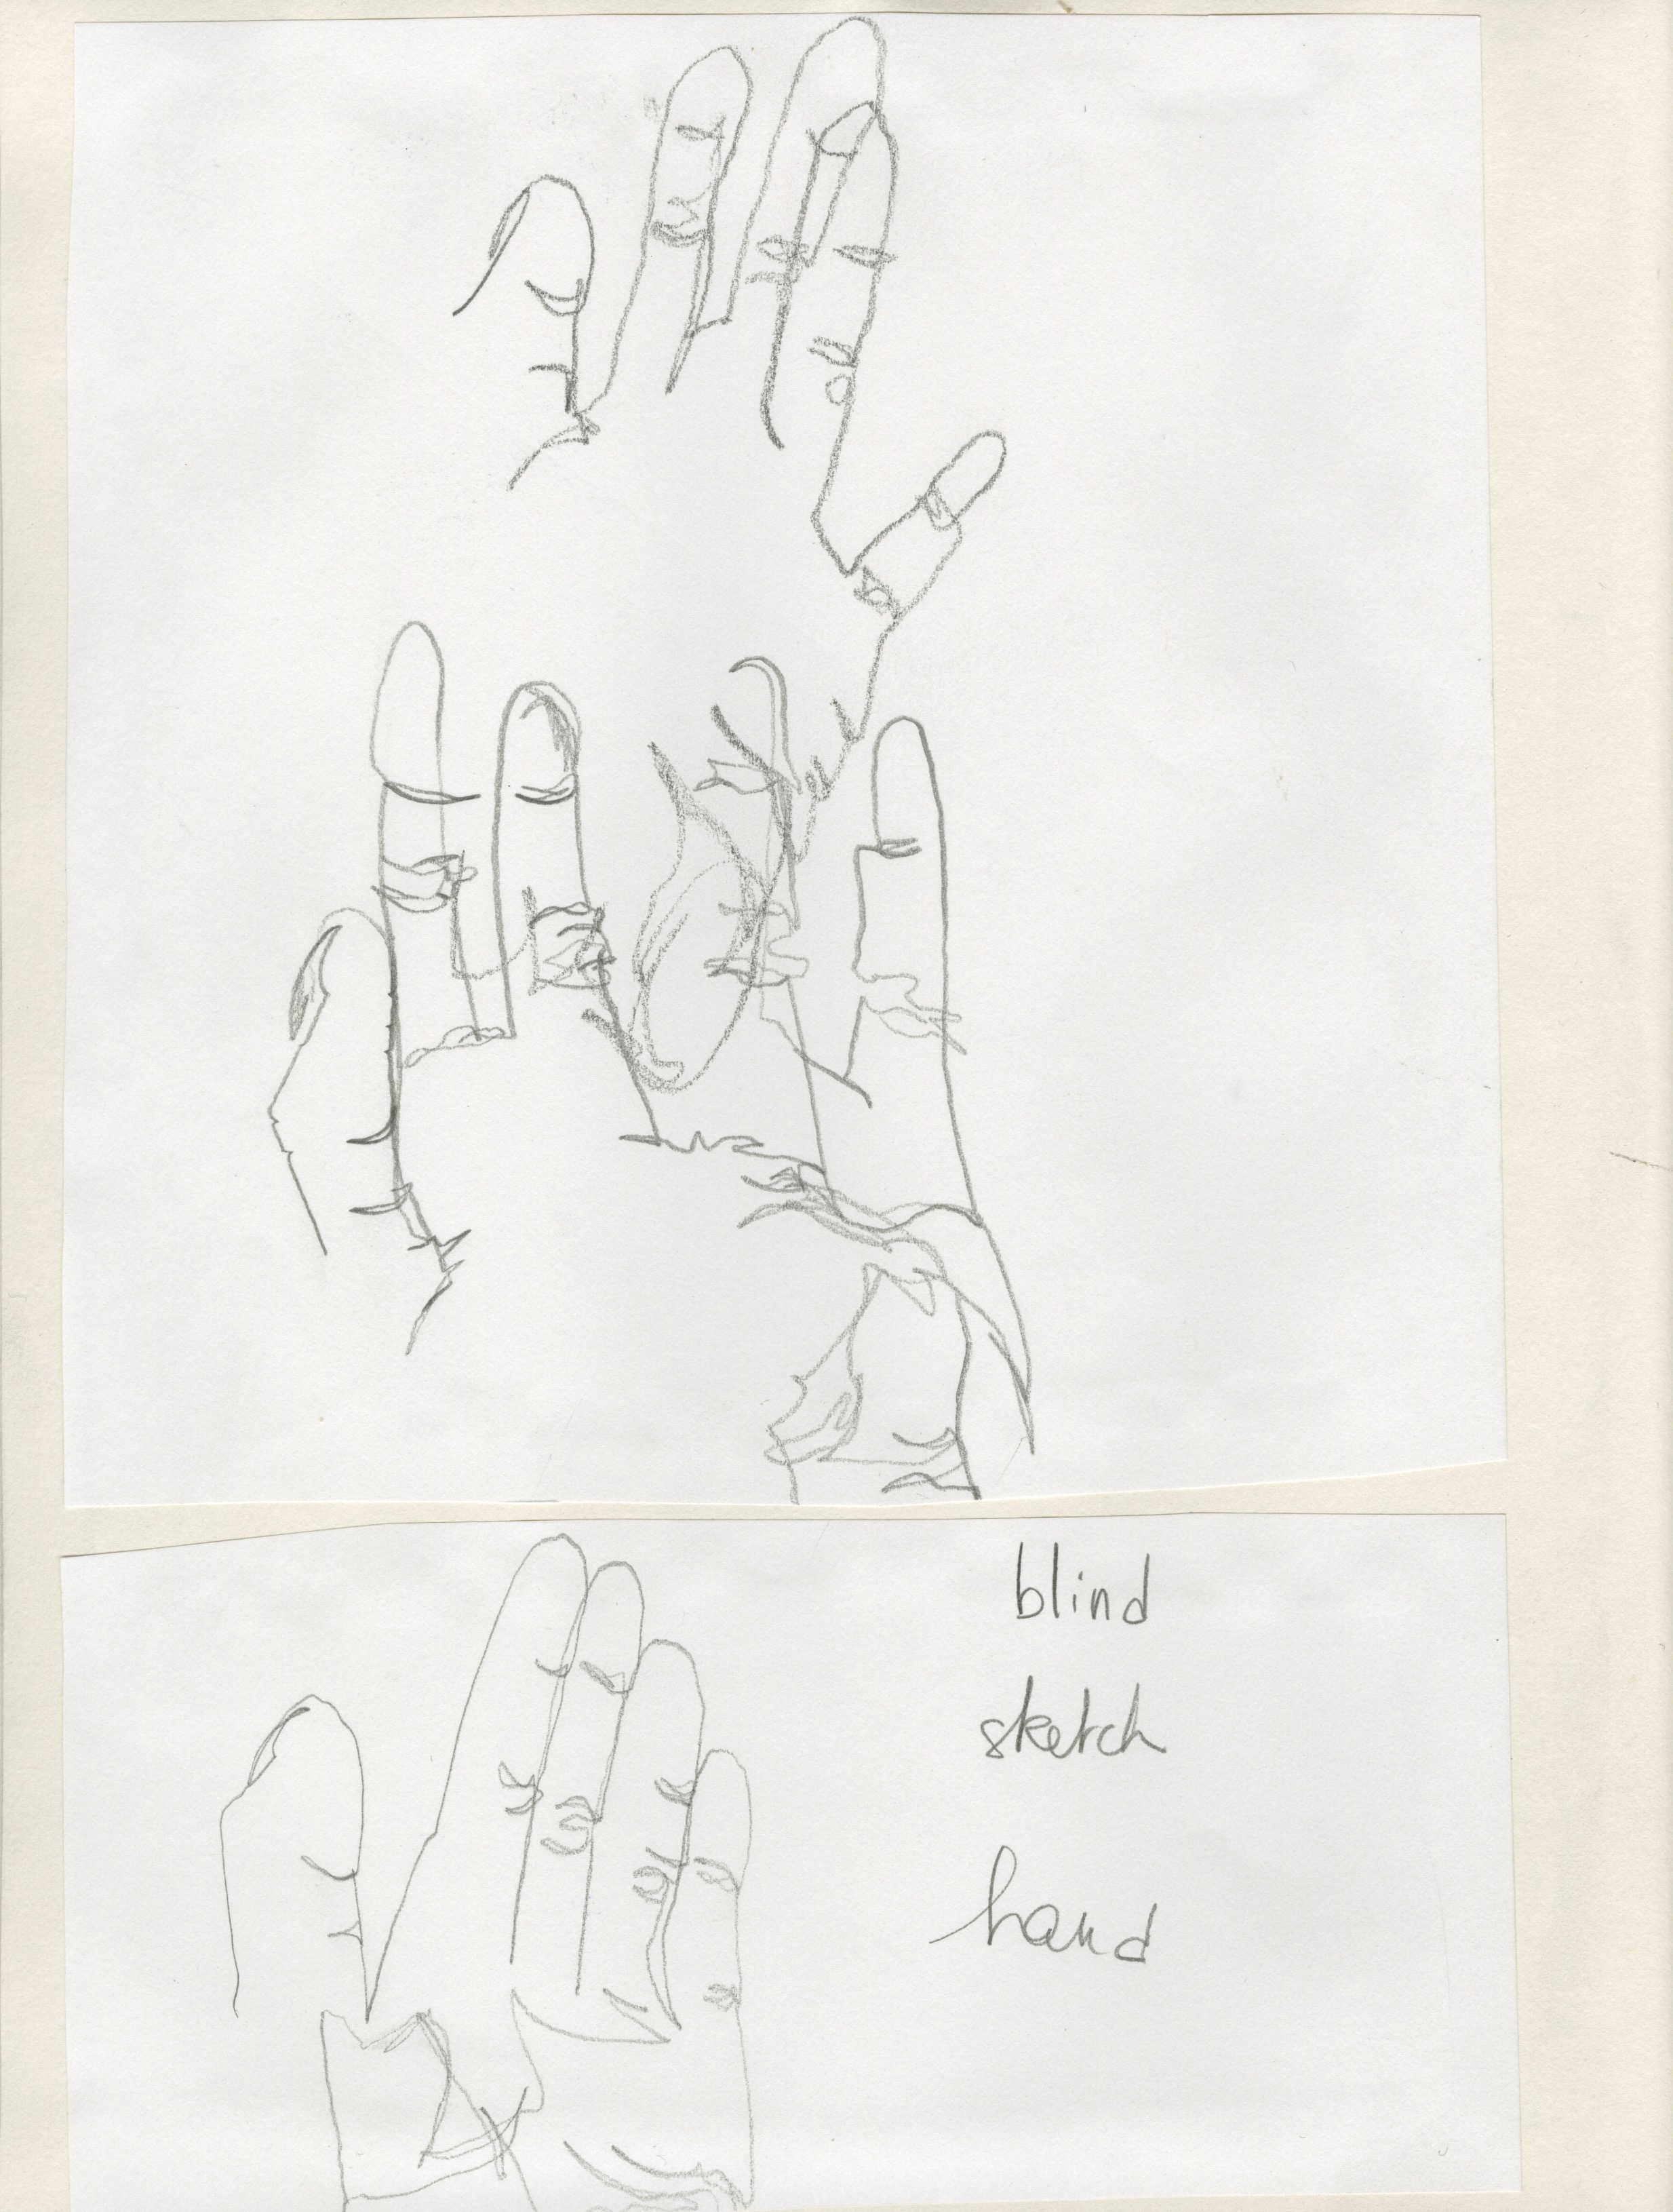 How to draw a hand – pencil